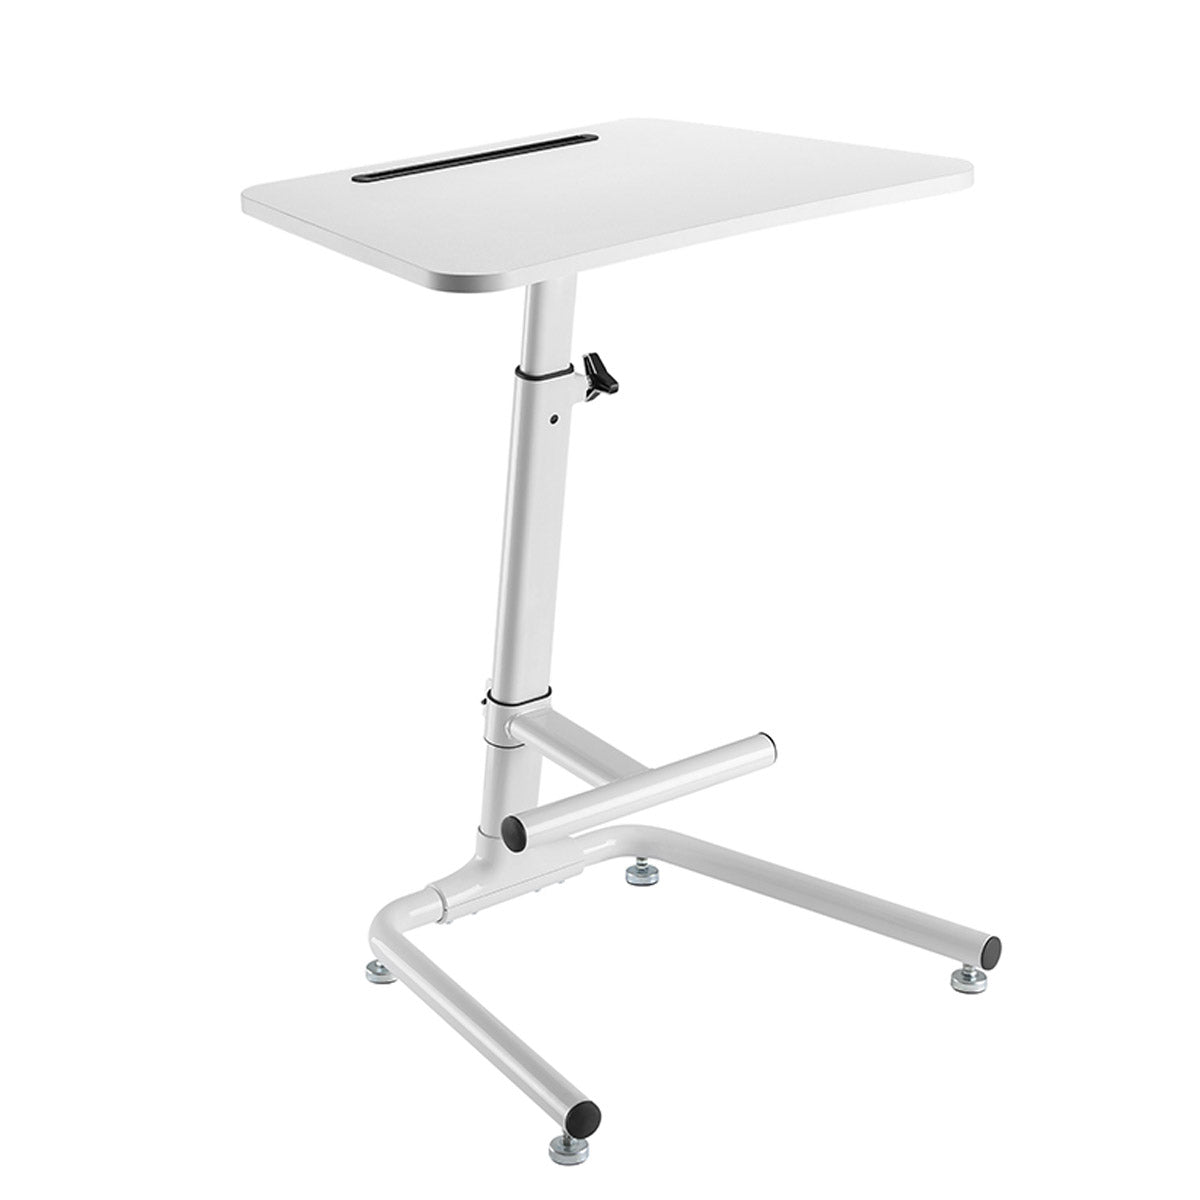 Lumi FWS03-1 Pneumatic On-floor Sit-stand Workstation with Footrest Bar - Ooberpad